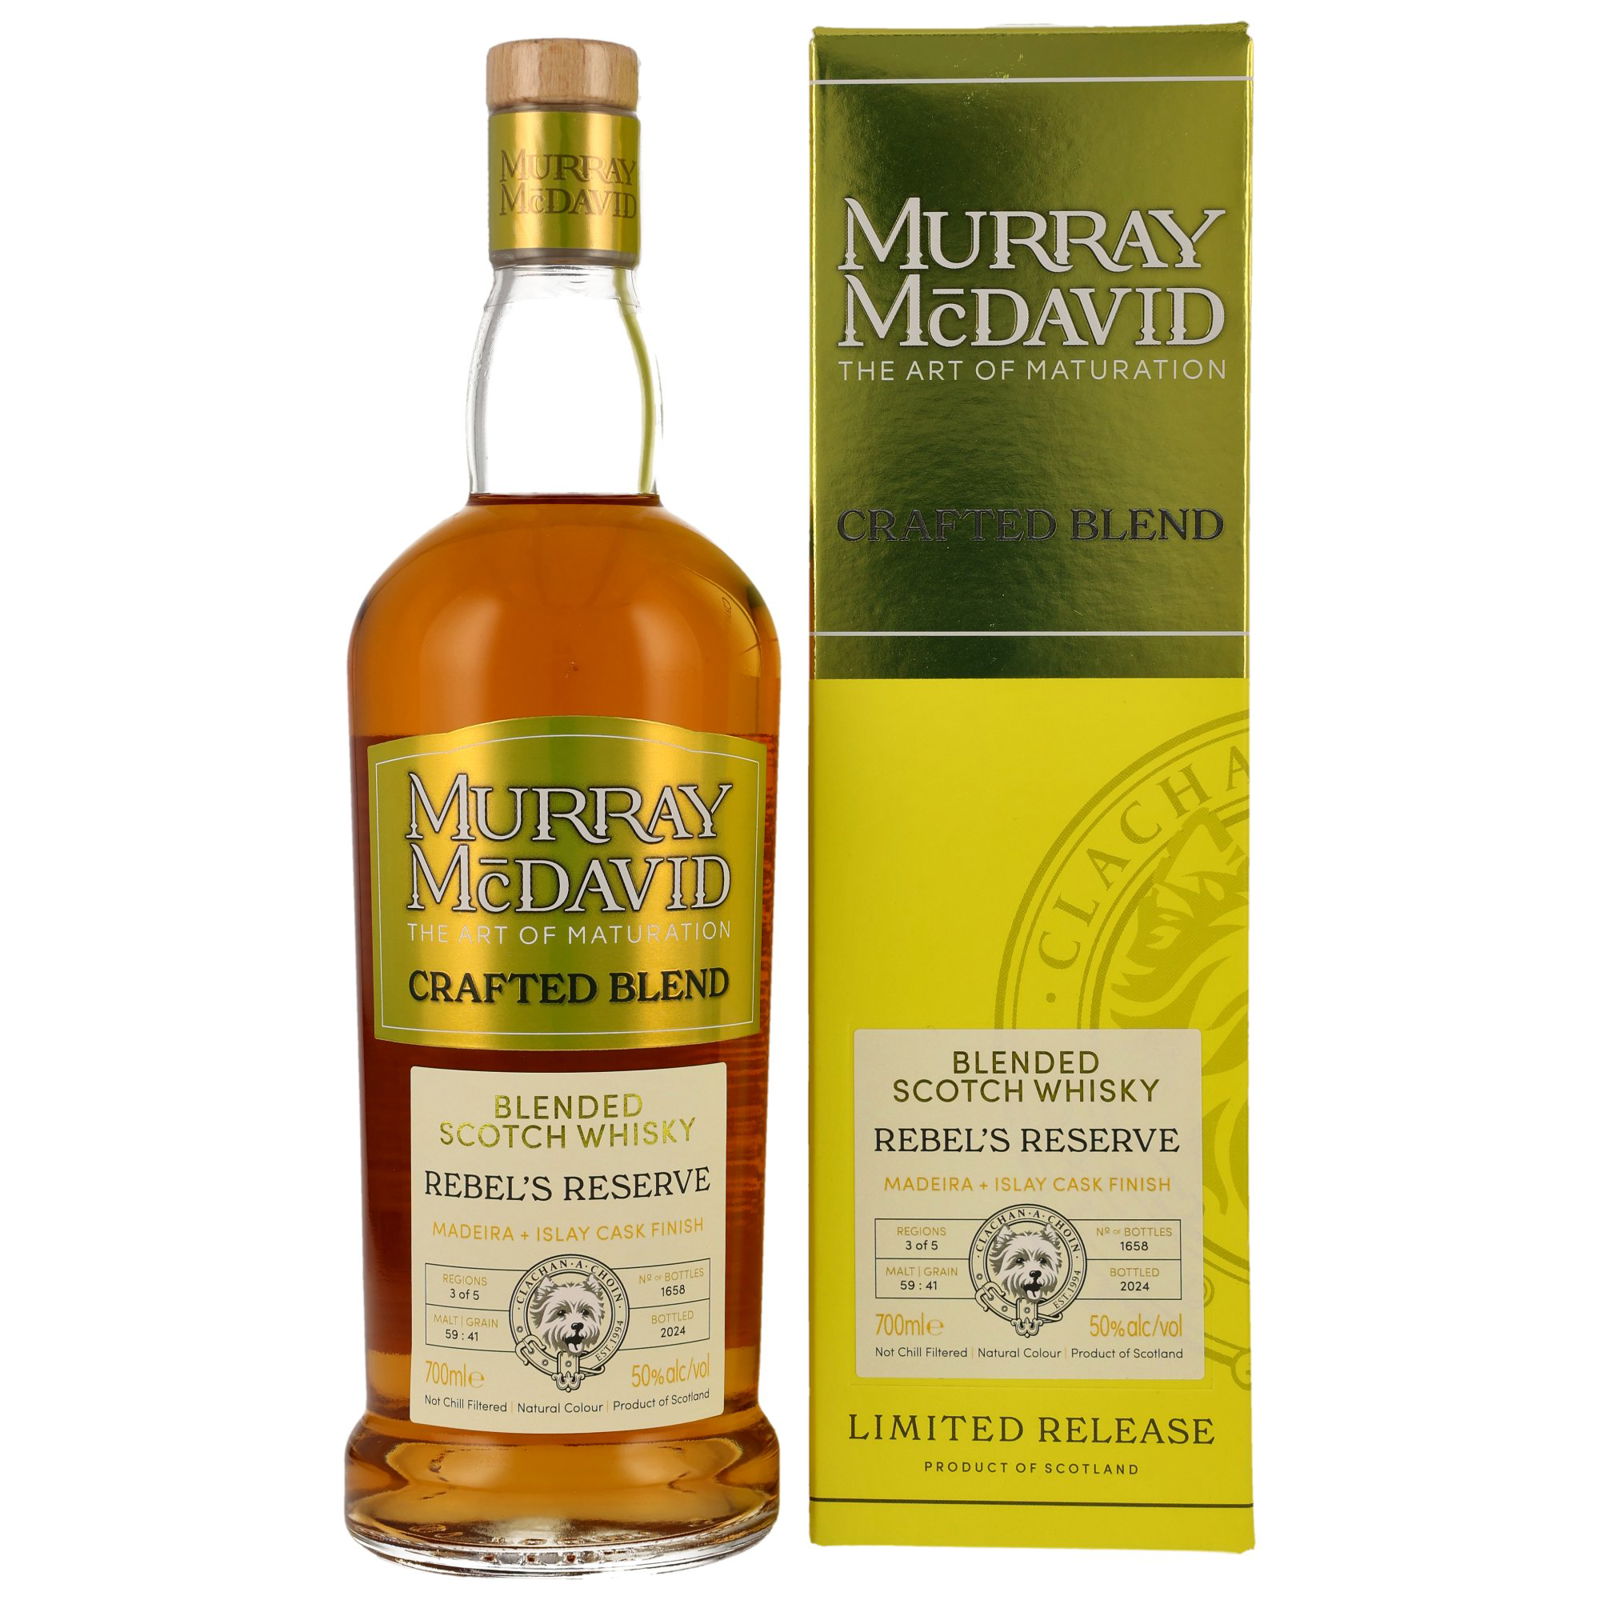 Rebels Reserve Madeira & Islay Cask Finish Crafted Blend (Murray McDavid)